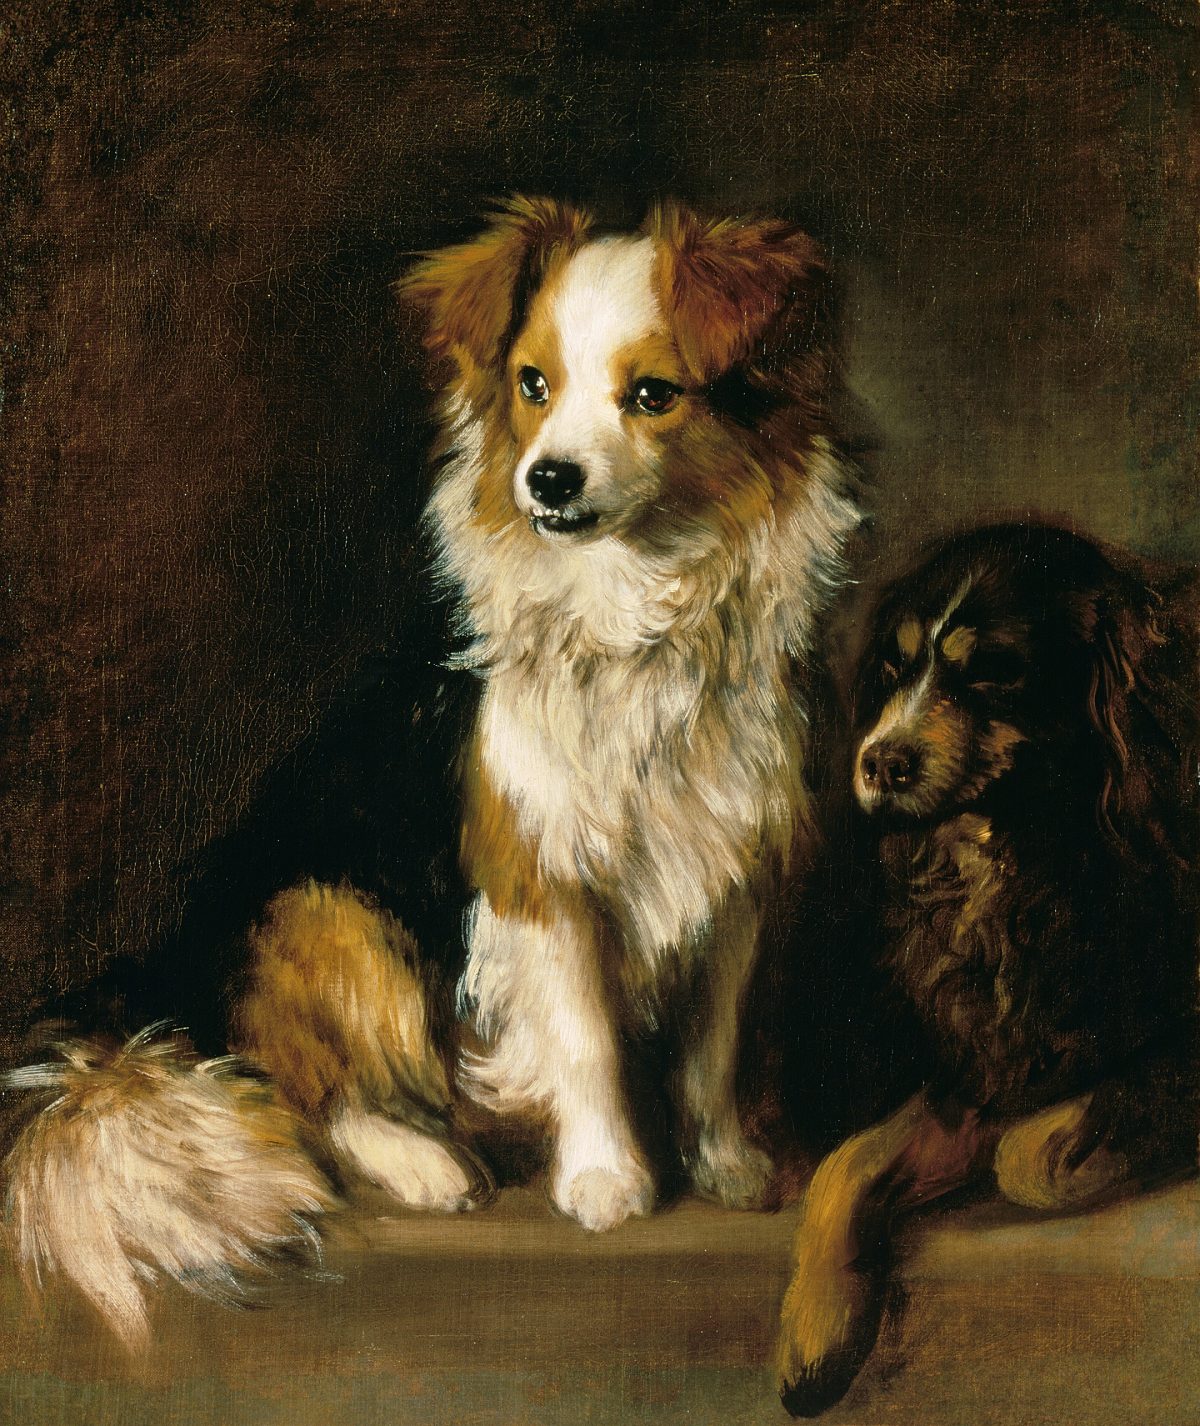 Two dogs